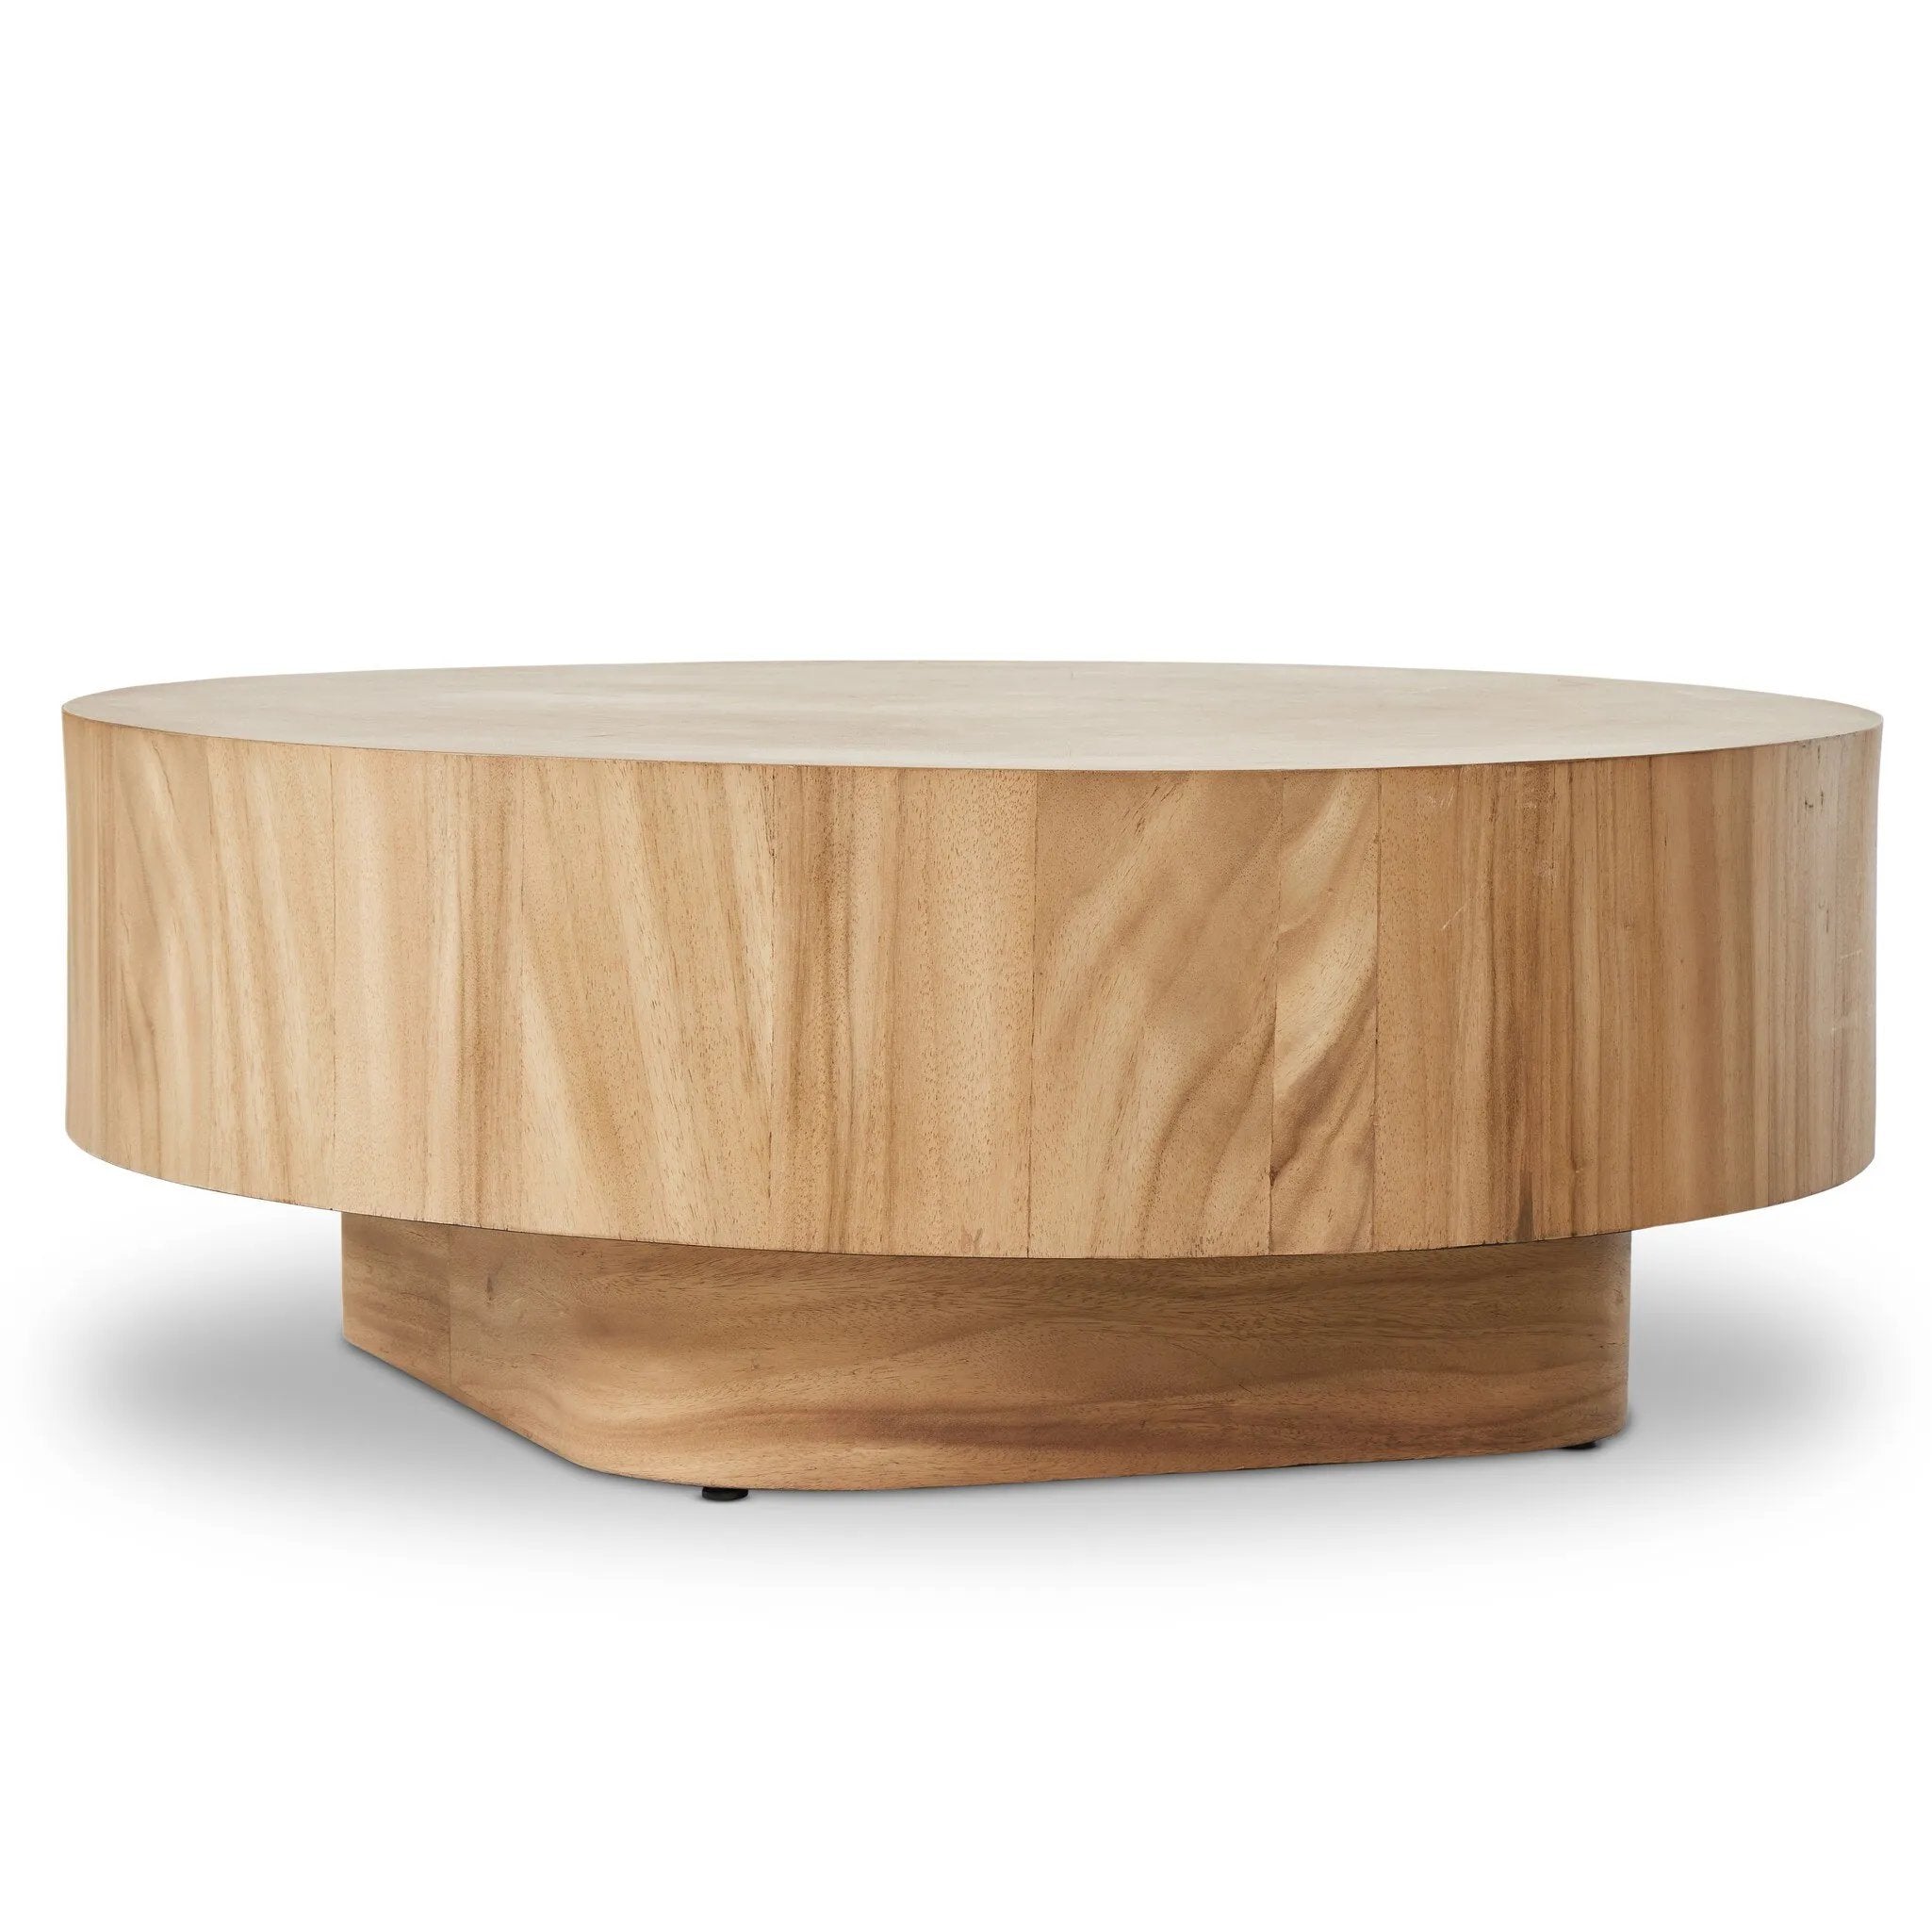 An organically shaped coffee table of Guanacaste features a golden finish with flowing grain and oyster cutting on top.Collection: Wesso Amethyst Home provides interior design, new home construction design consulting, vintage area rugs, and lighting in the Laguna Beach metro area.